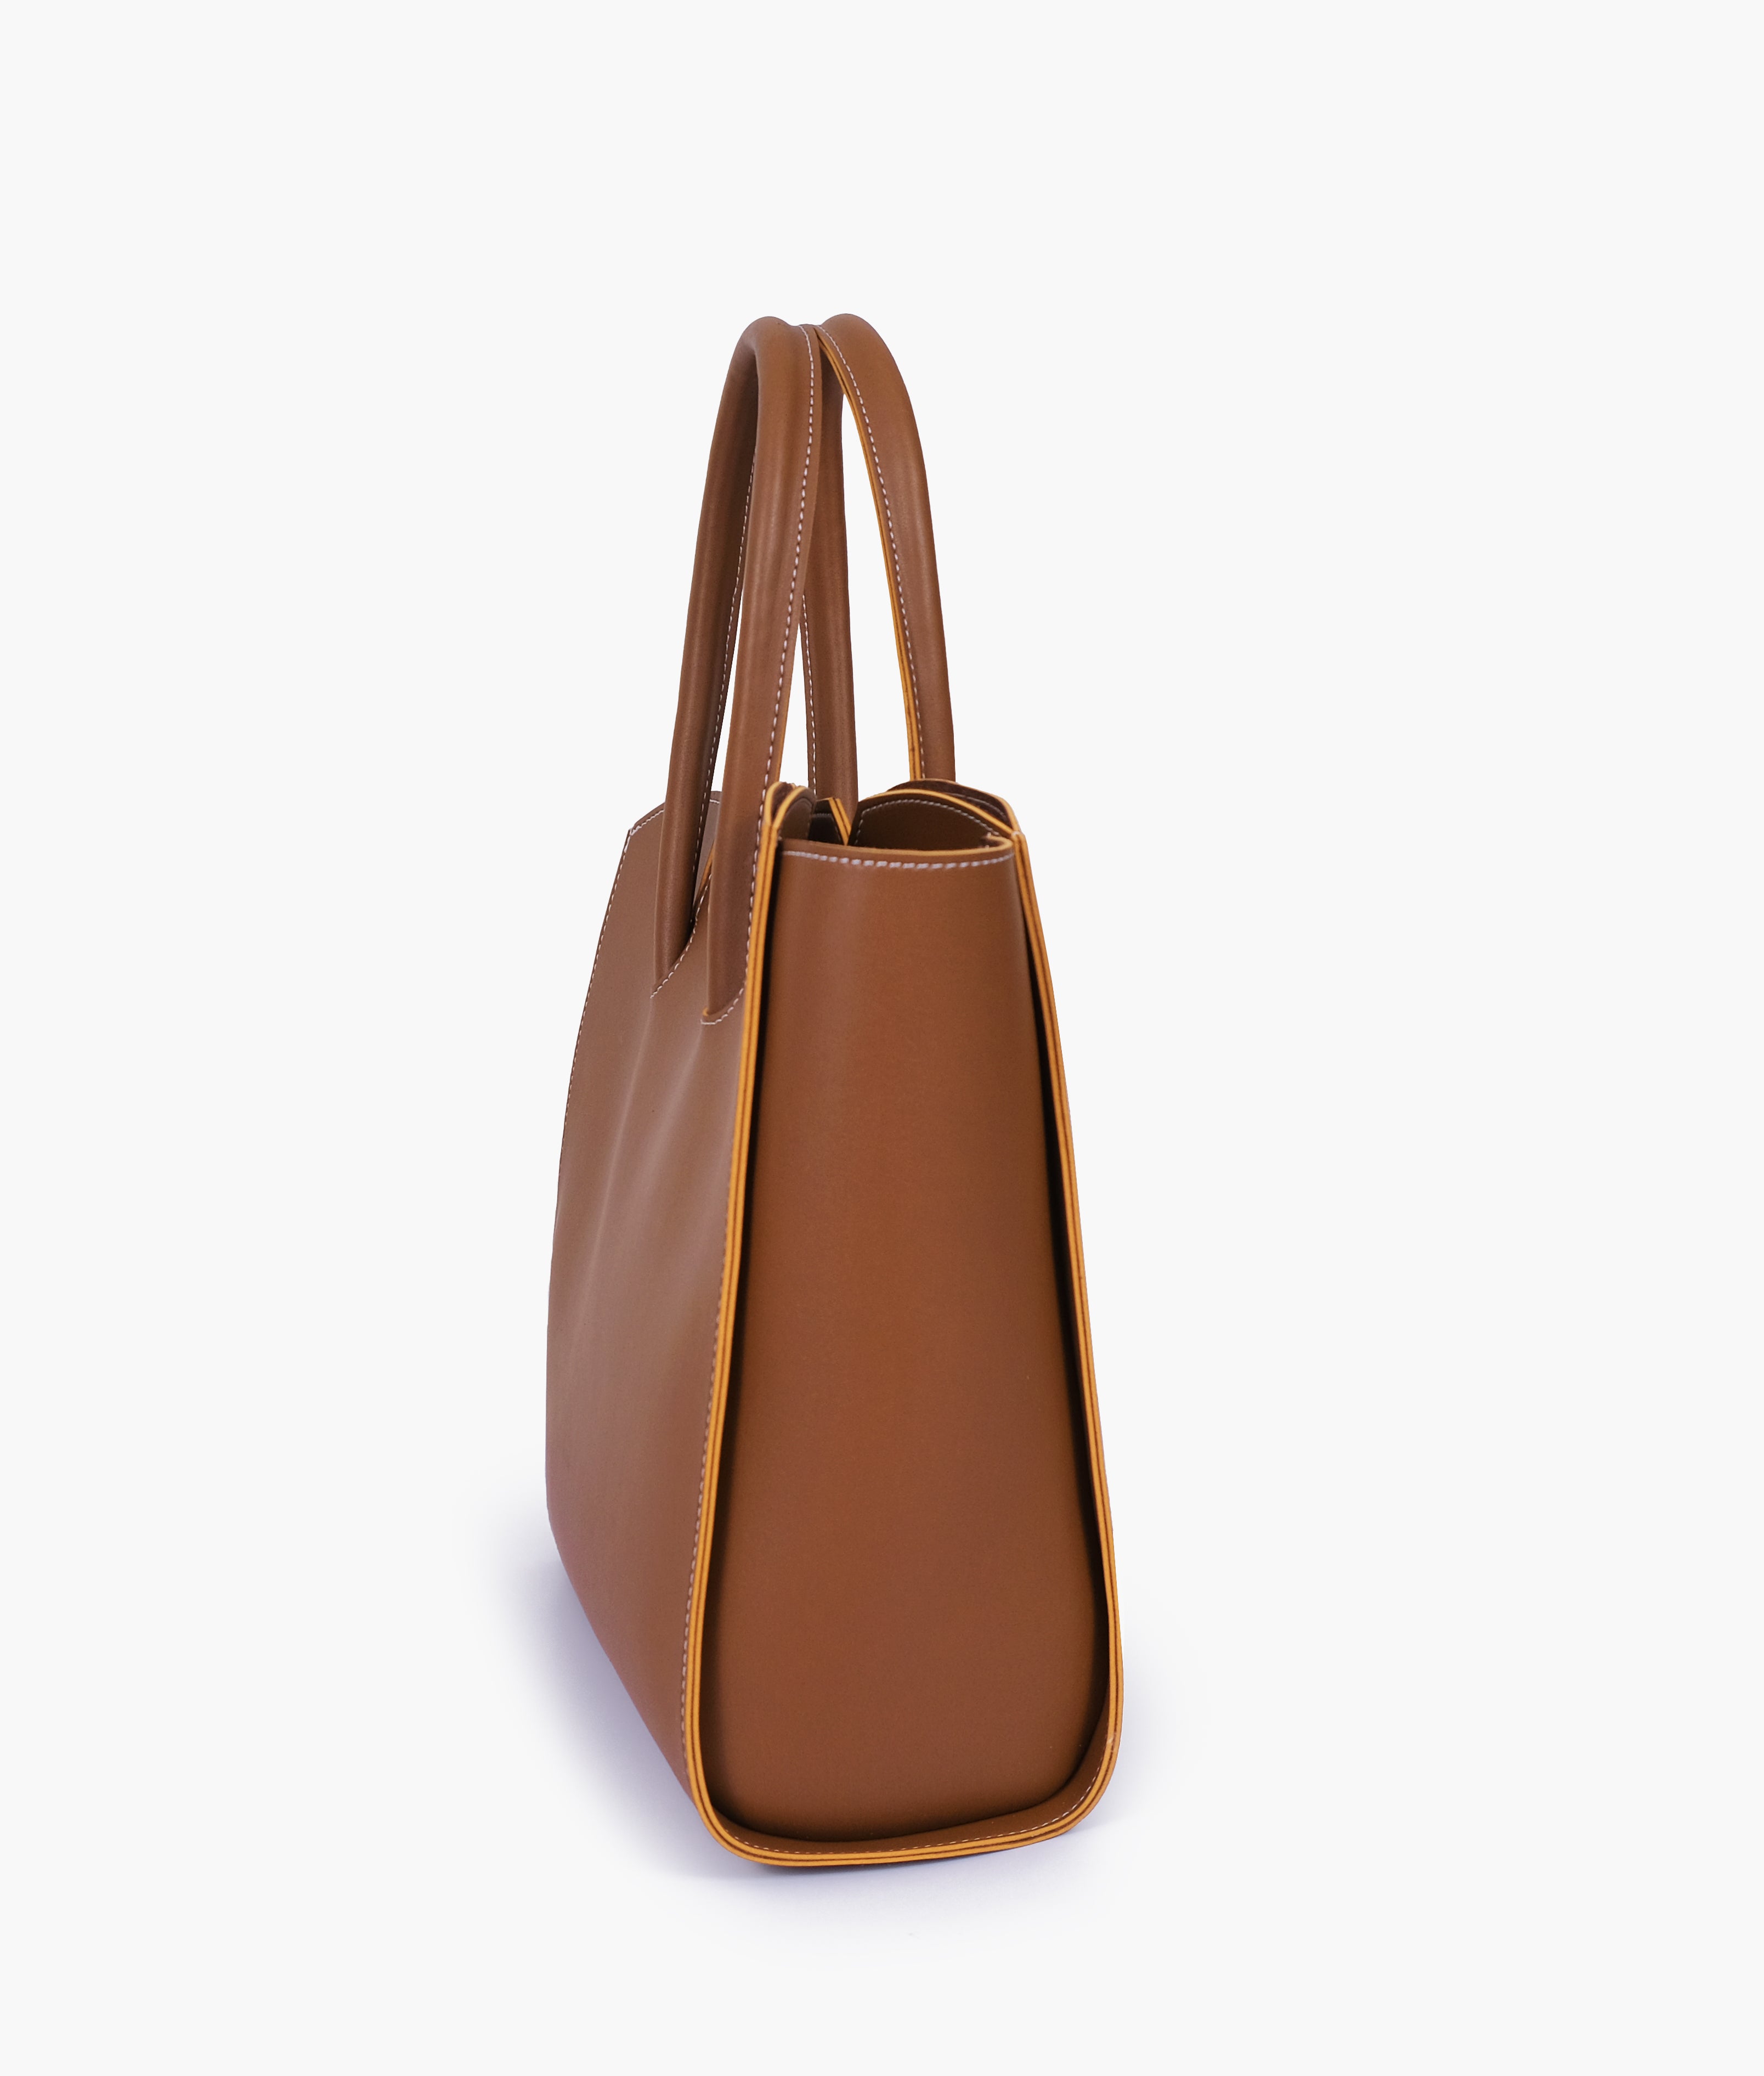 Brown tote bag with multiple compartments